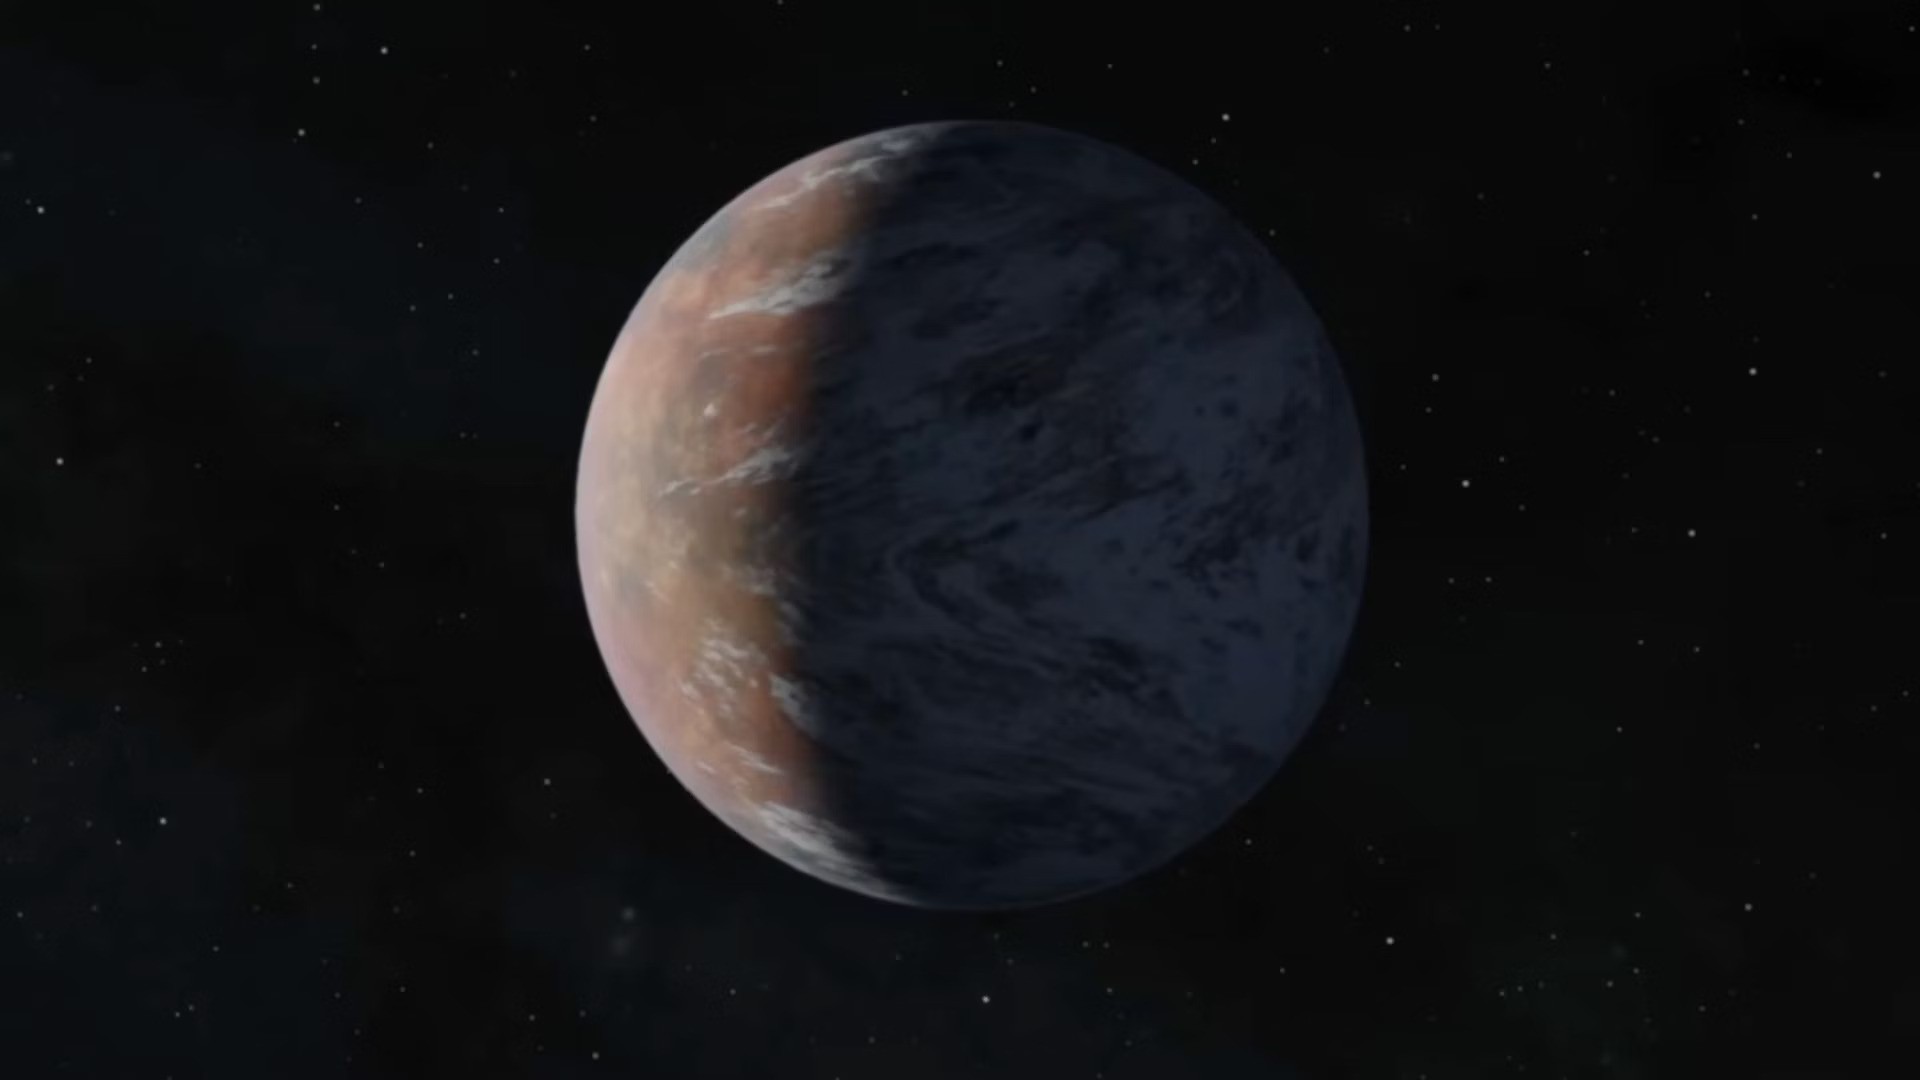 An illustration of the new super-earth